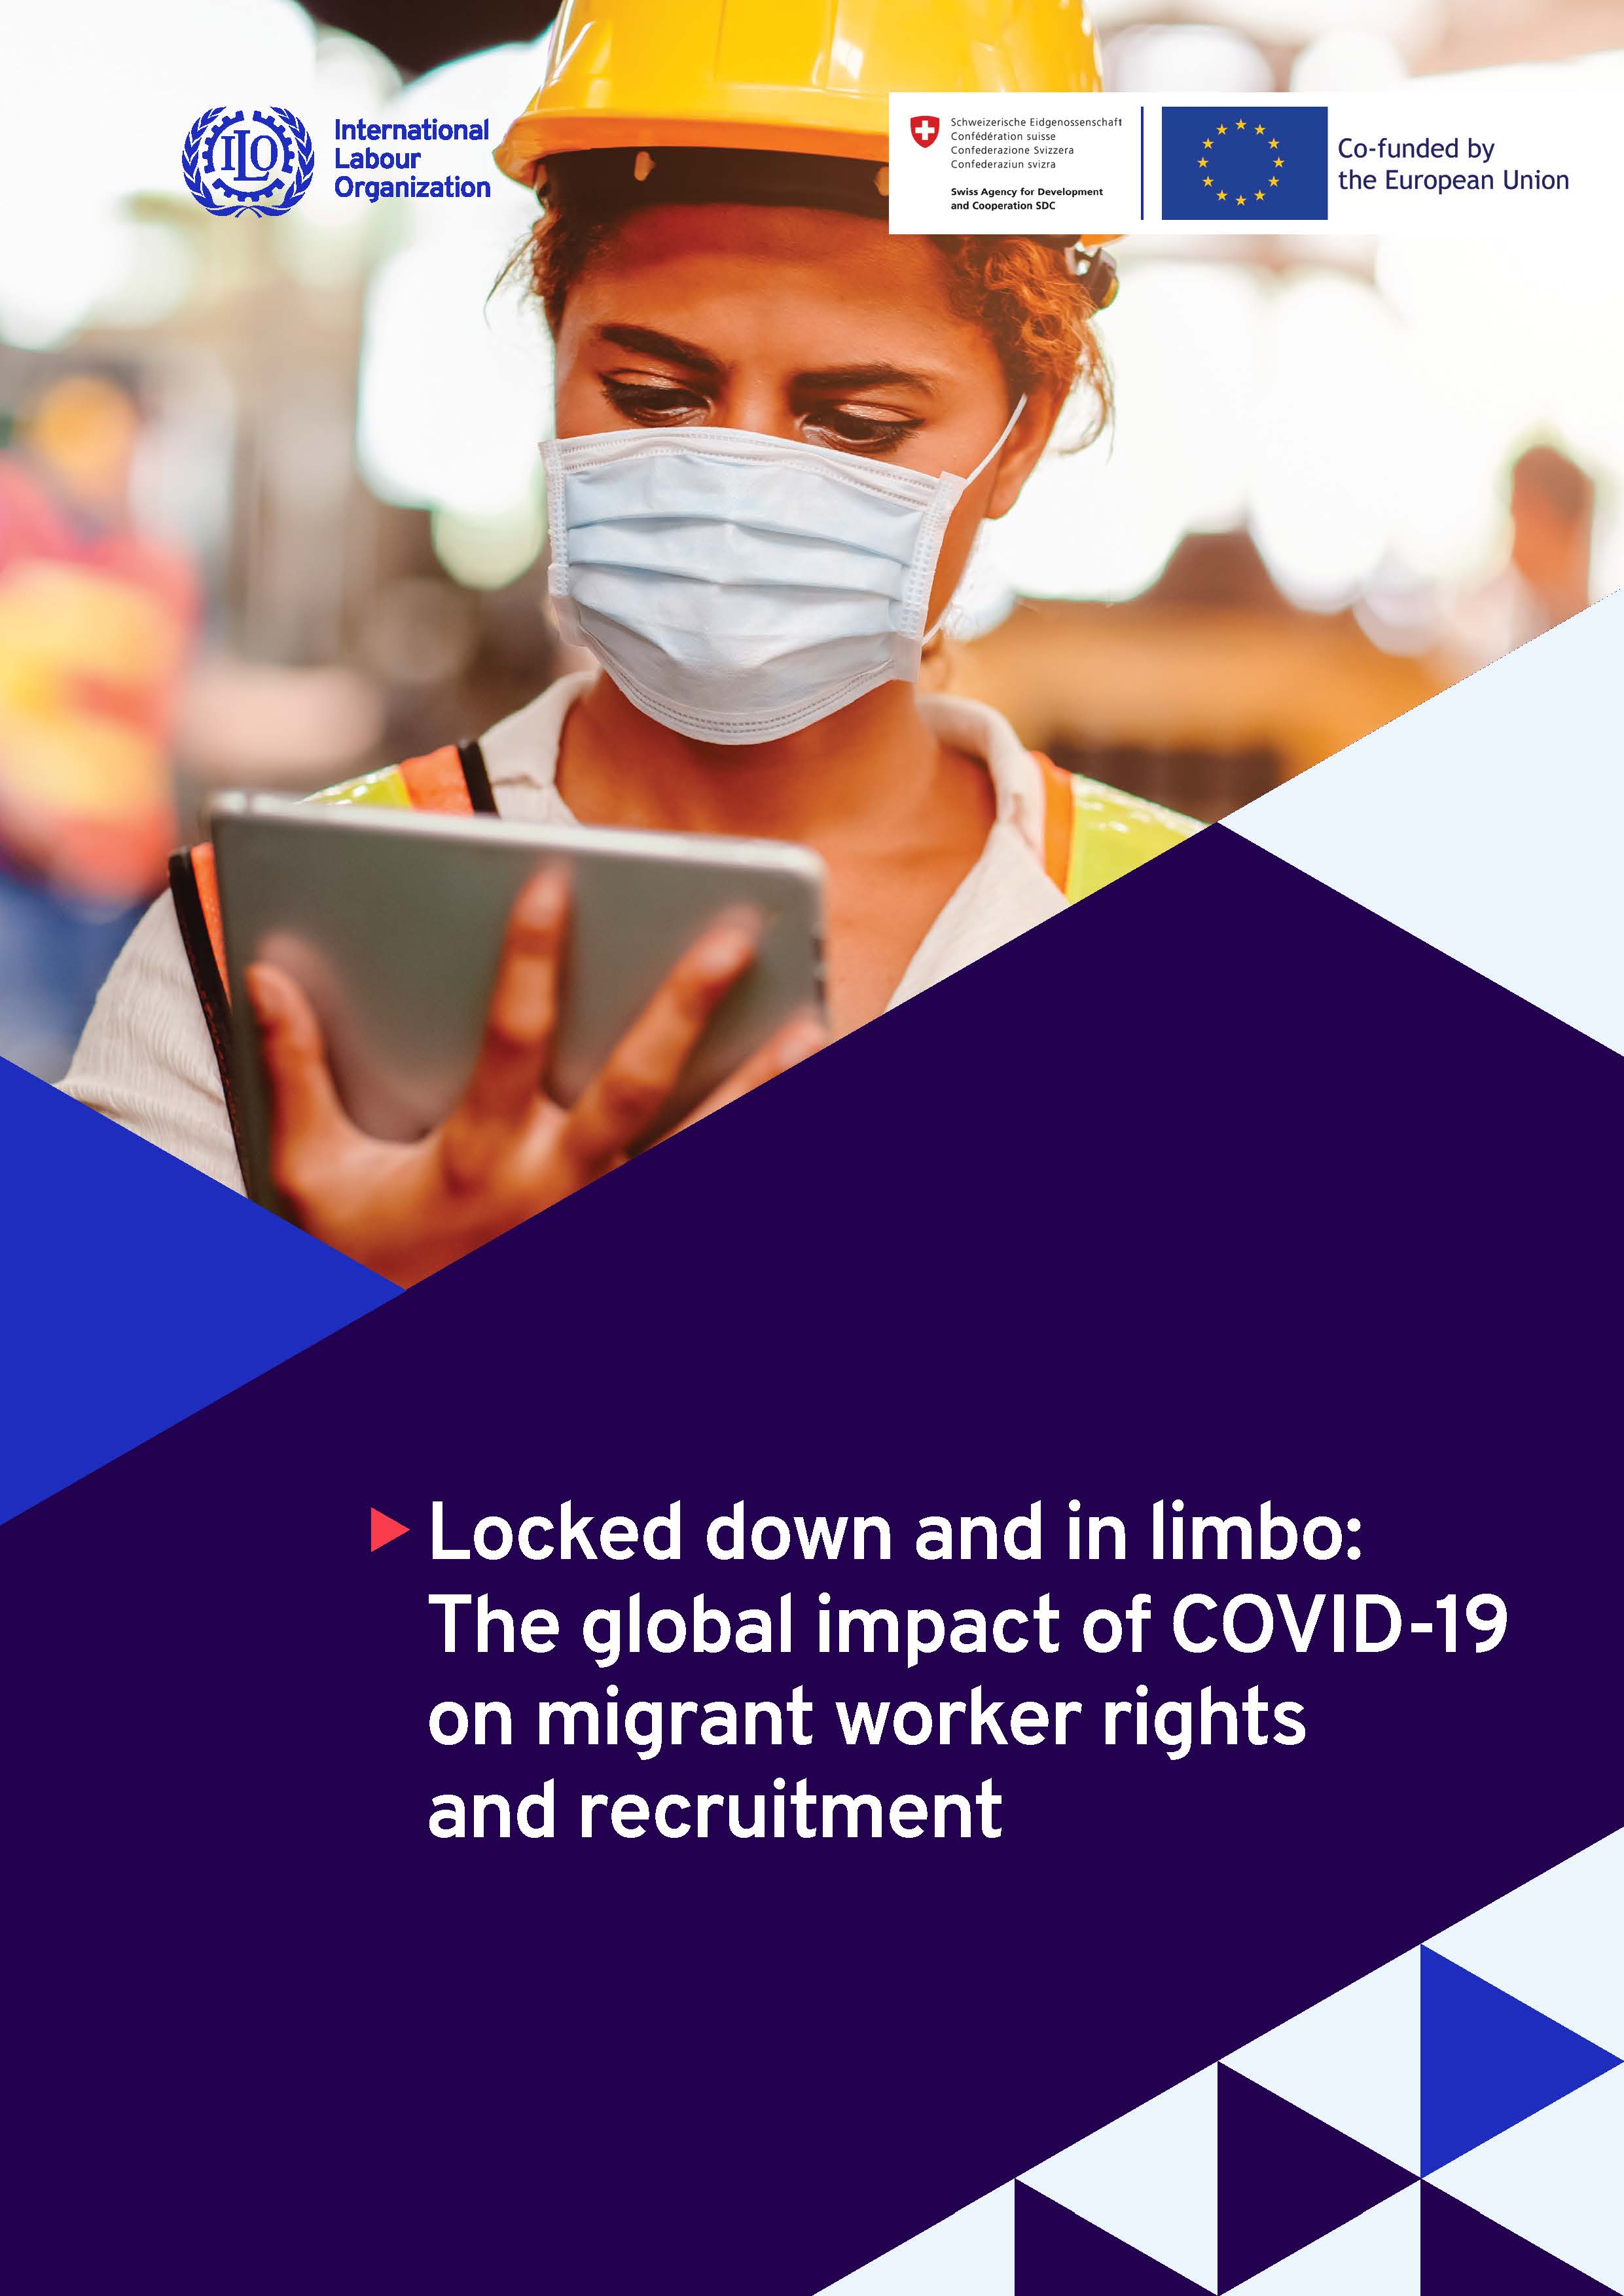 Locked down and in limbo: The global impact of COVID-19 on migrant worker rights and recruitment